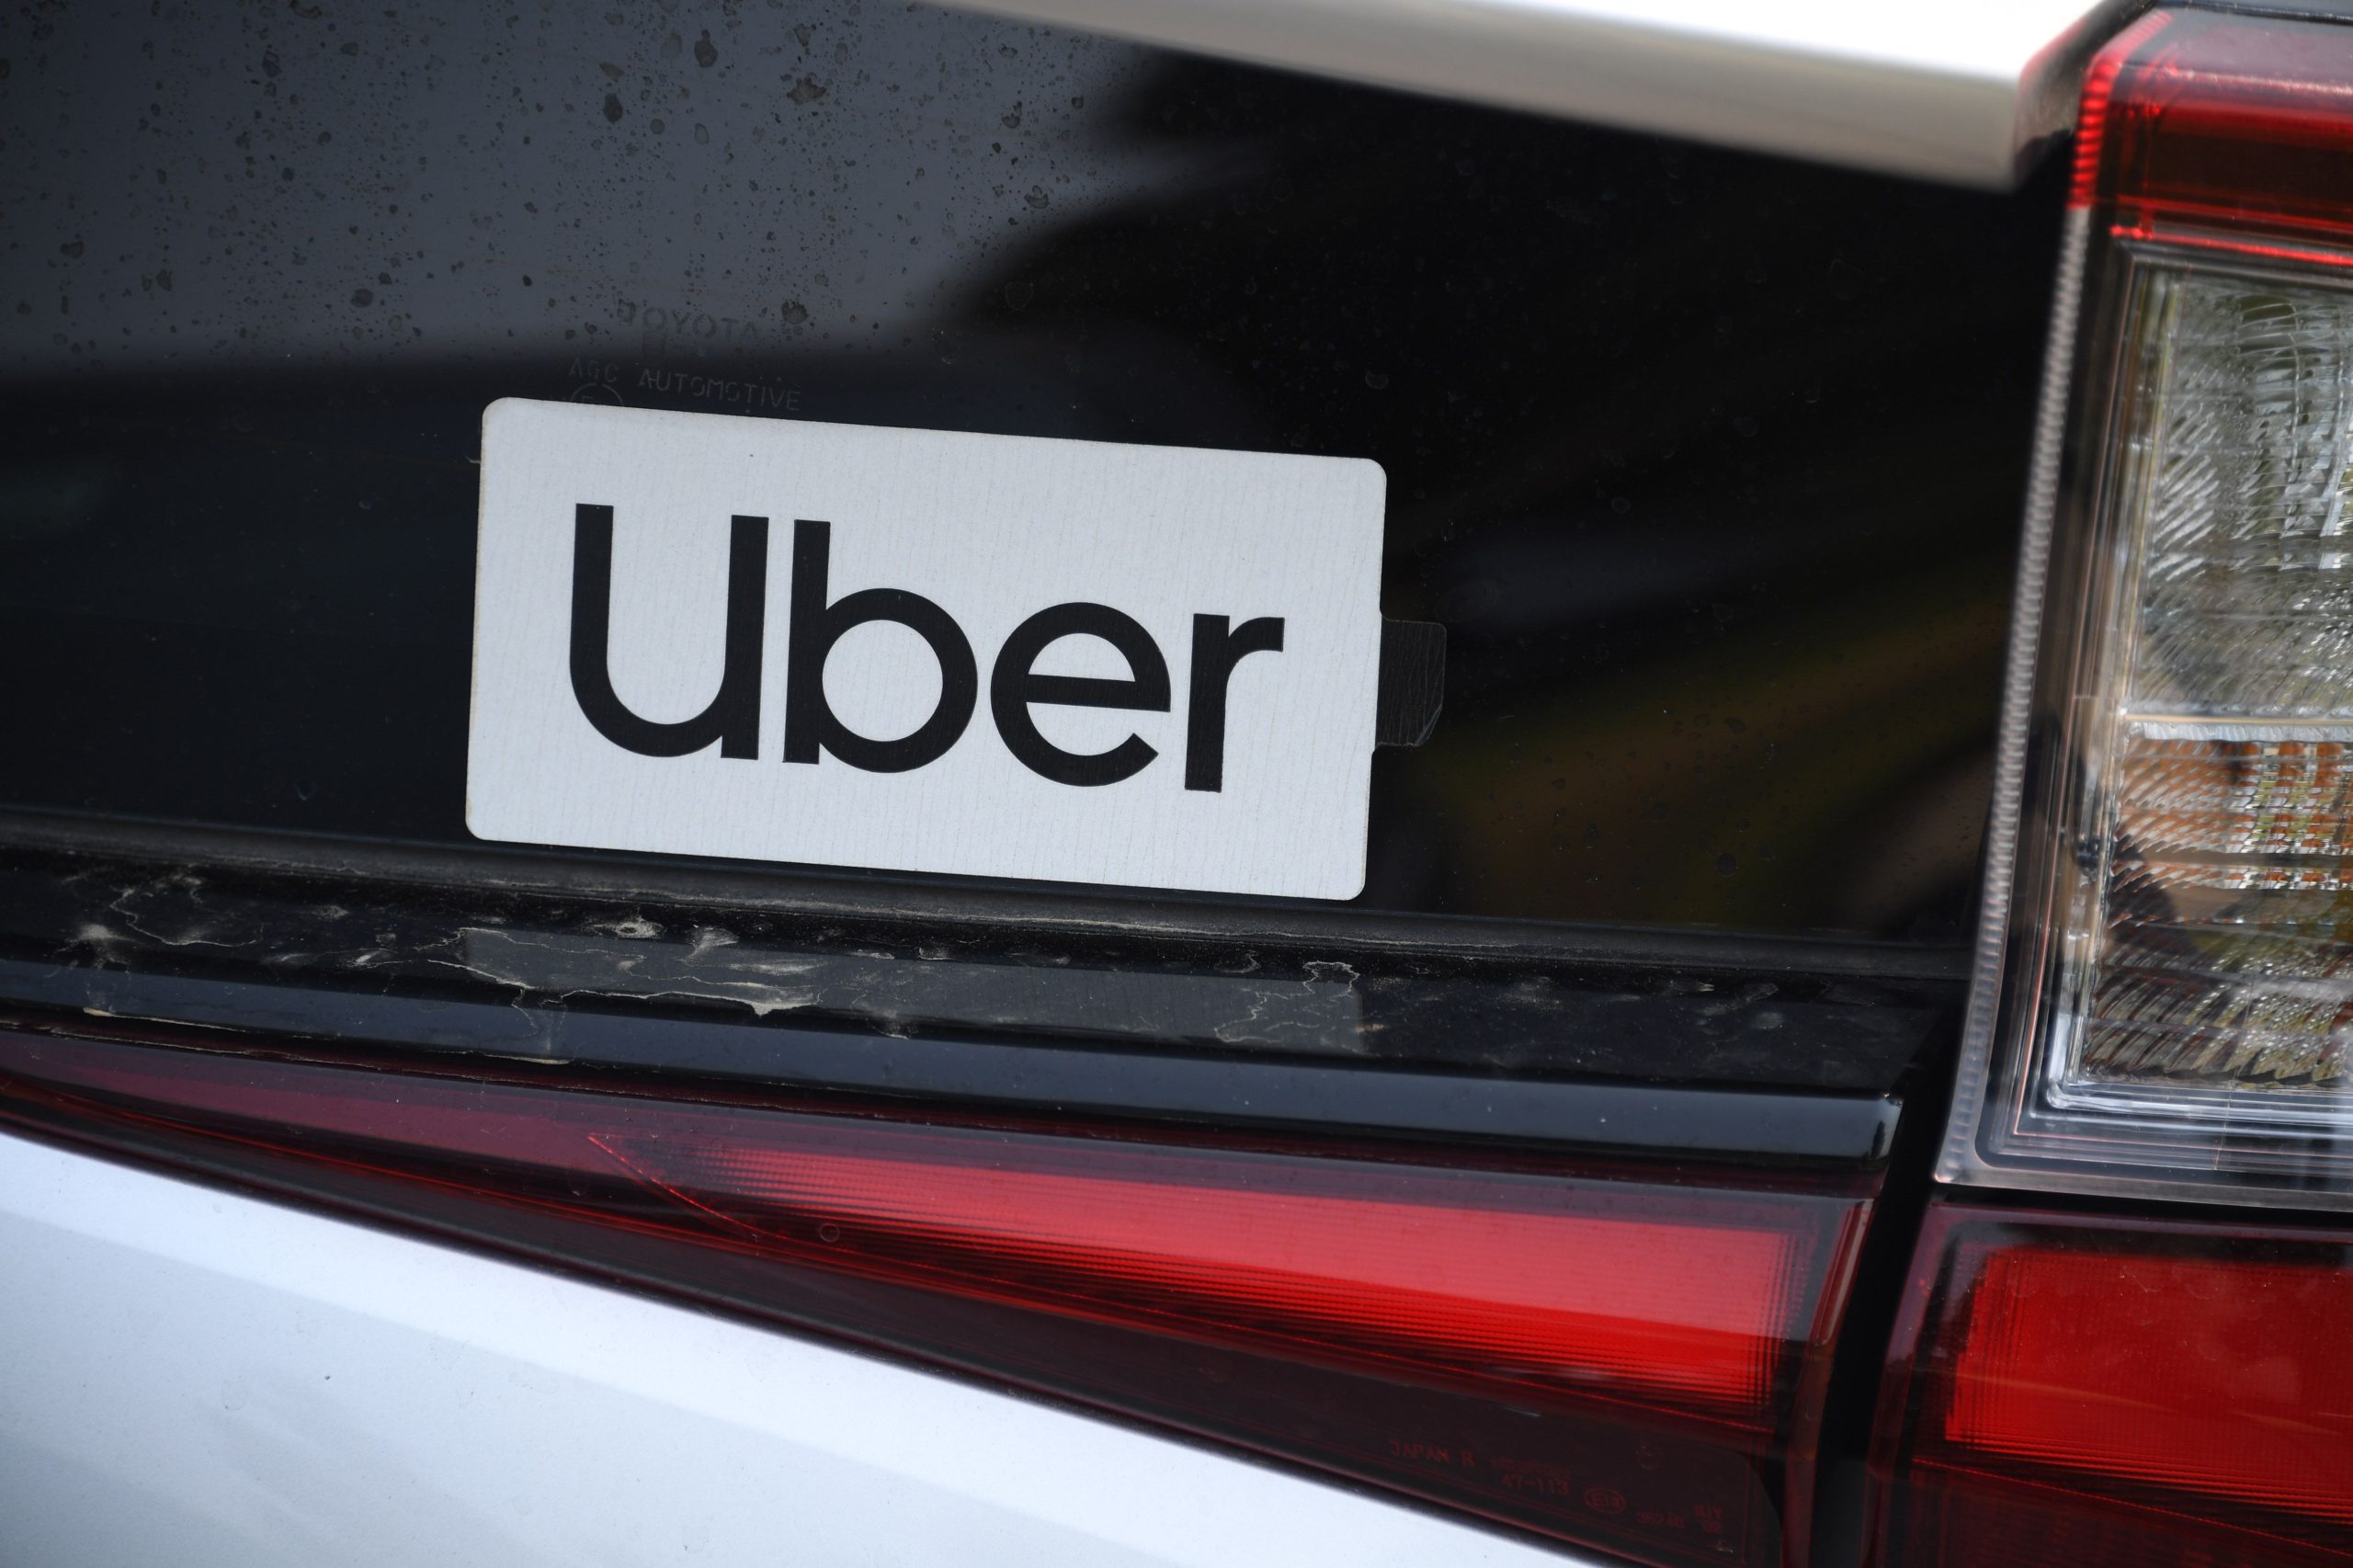 Former Uber security chief arrested for covering up 2016 hack